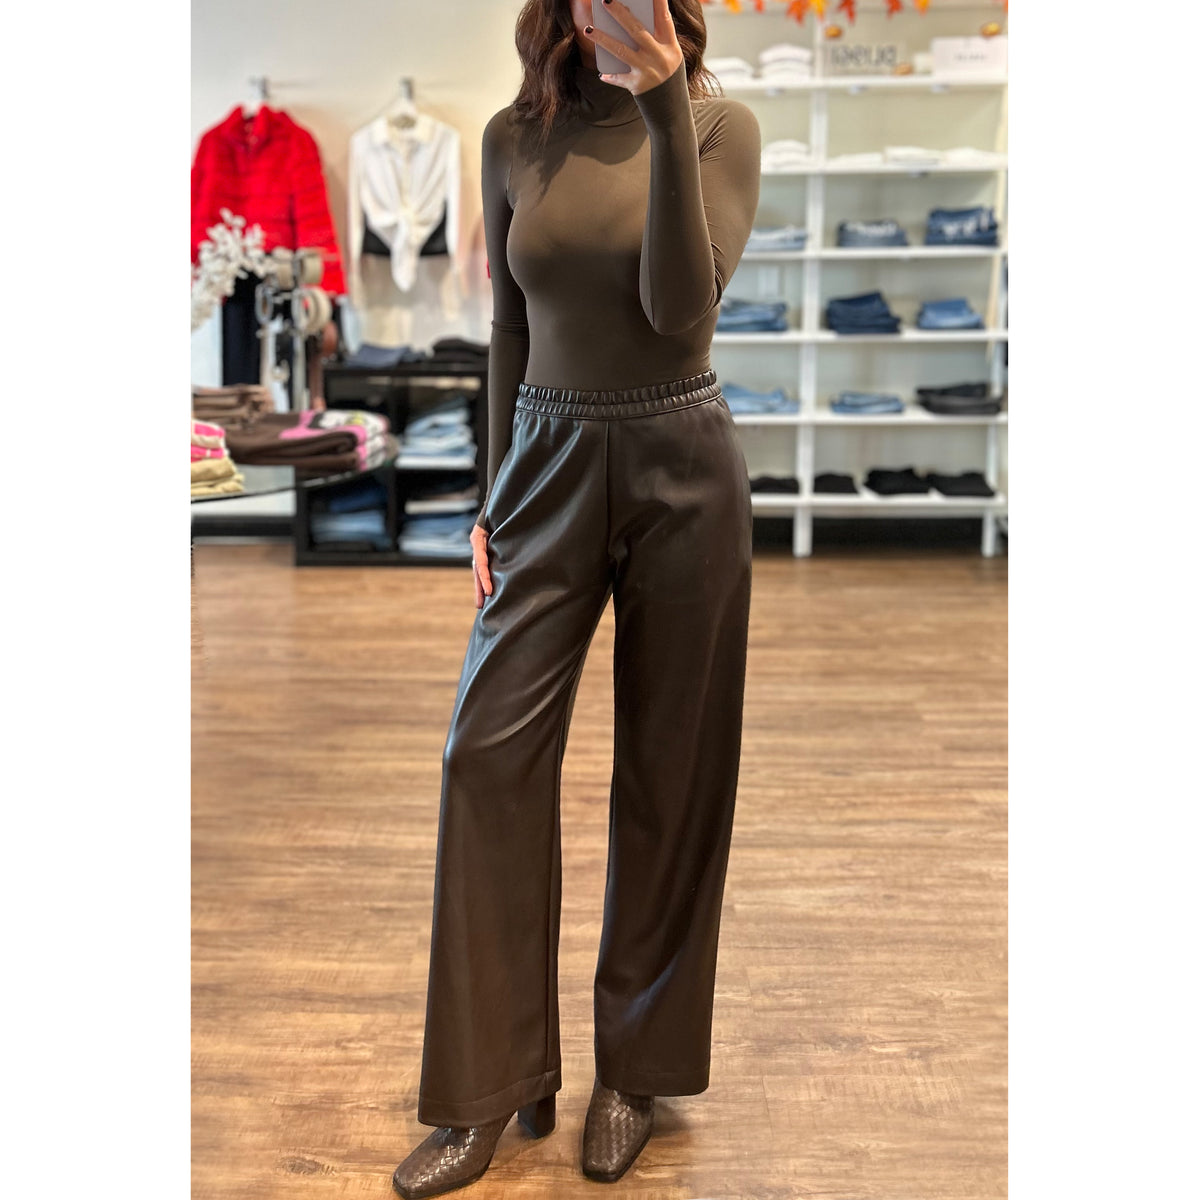 Enza Costa Soft Faux Leather Straight Leg Pant in Espresso